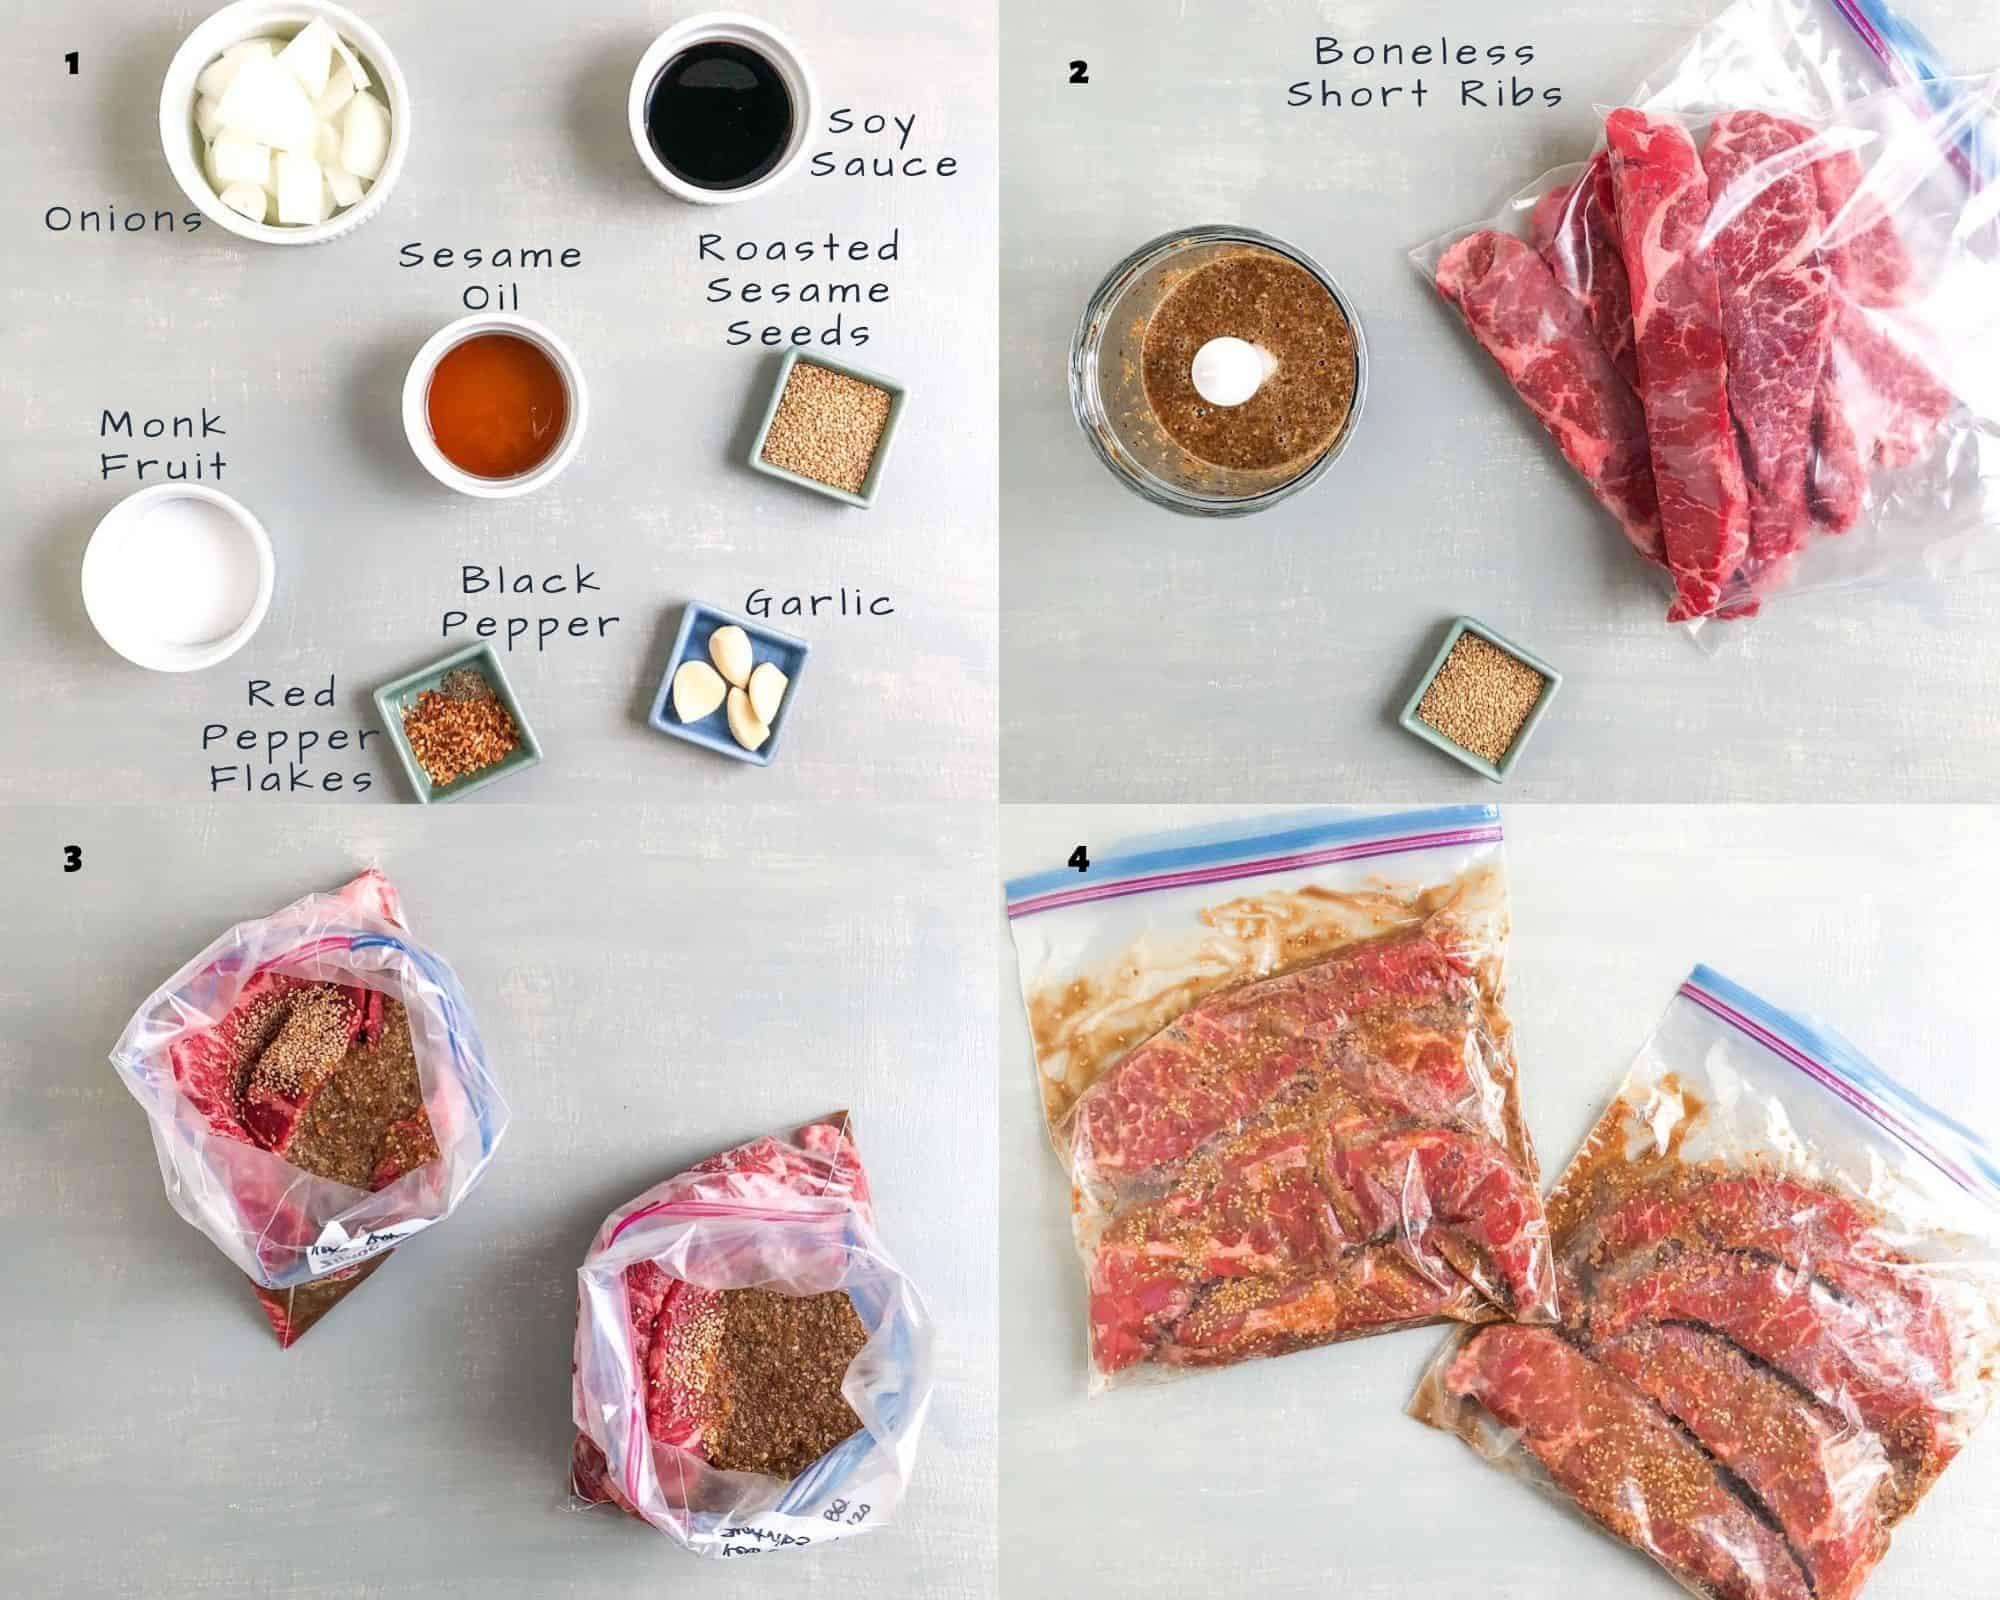 Ingredients and process shots for short ribs